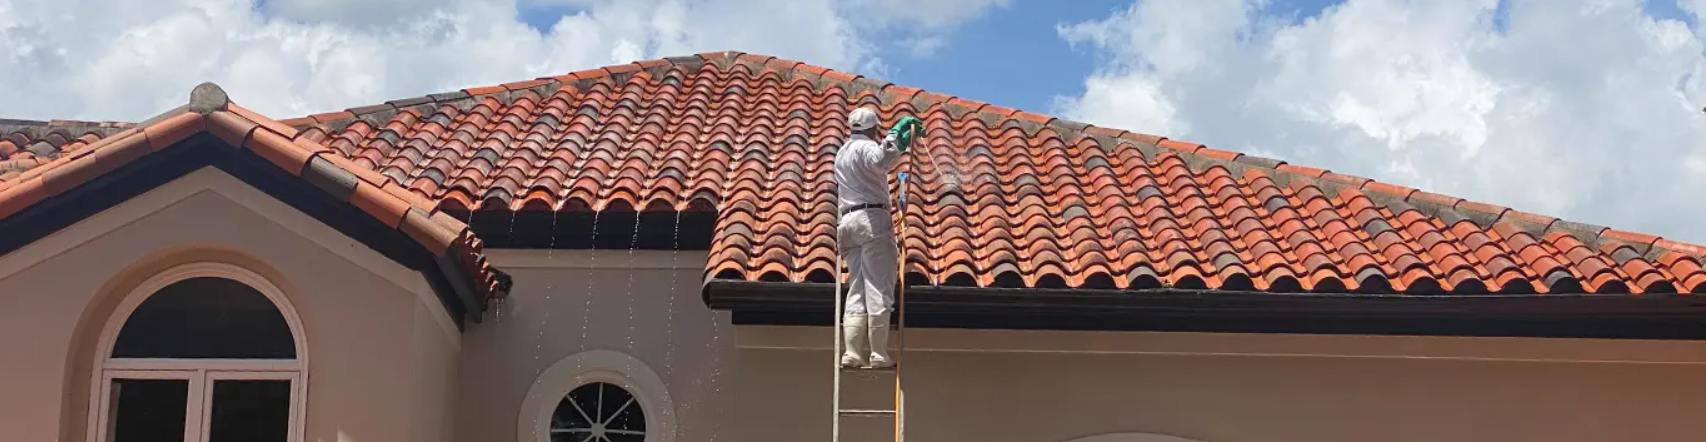 Roof Cleaning Services in Orlando, FL